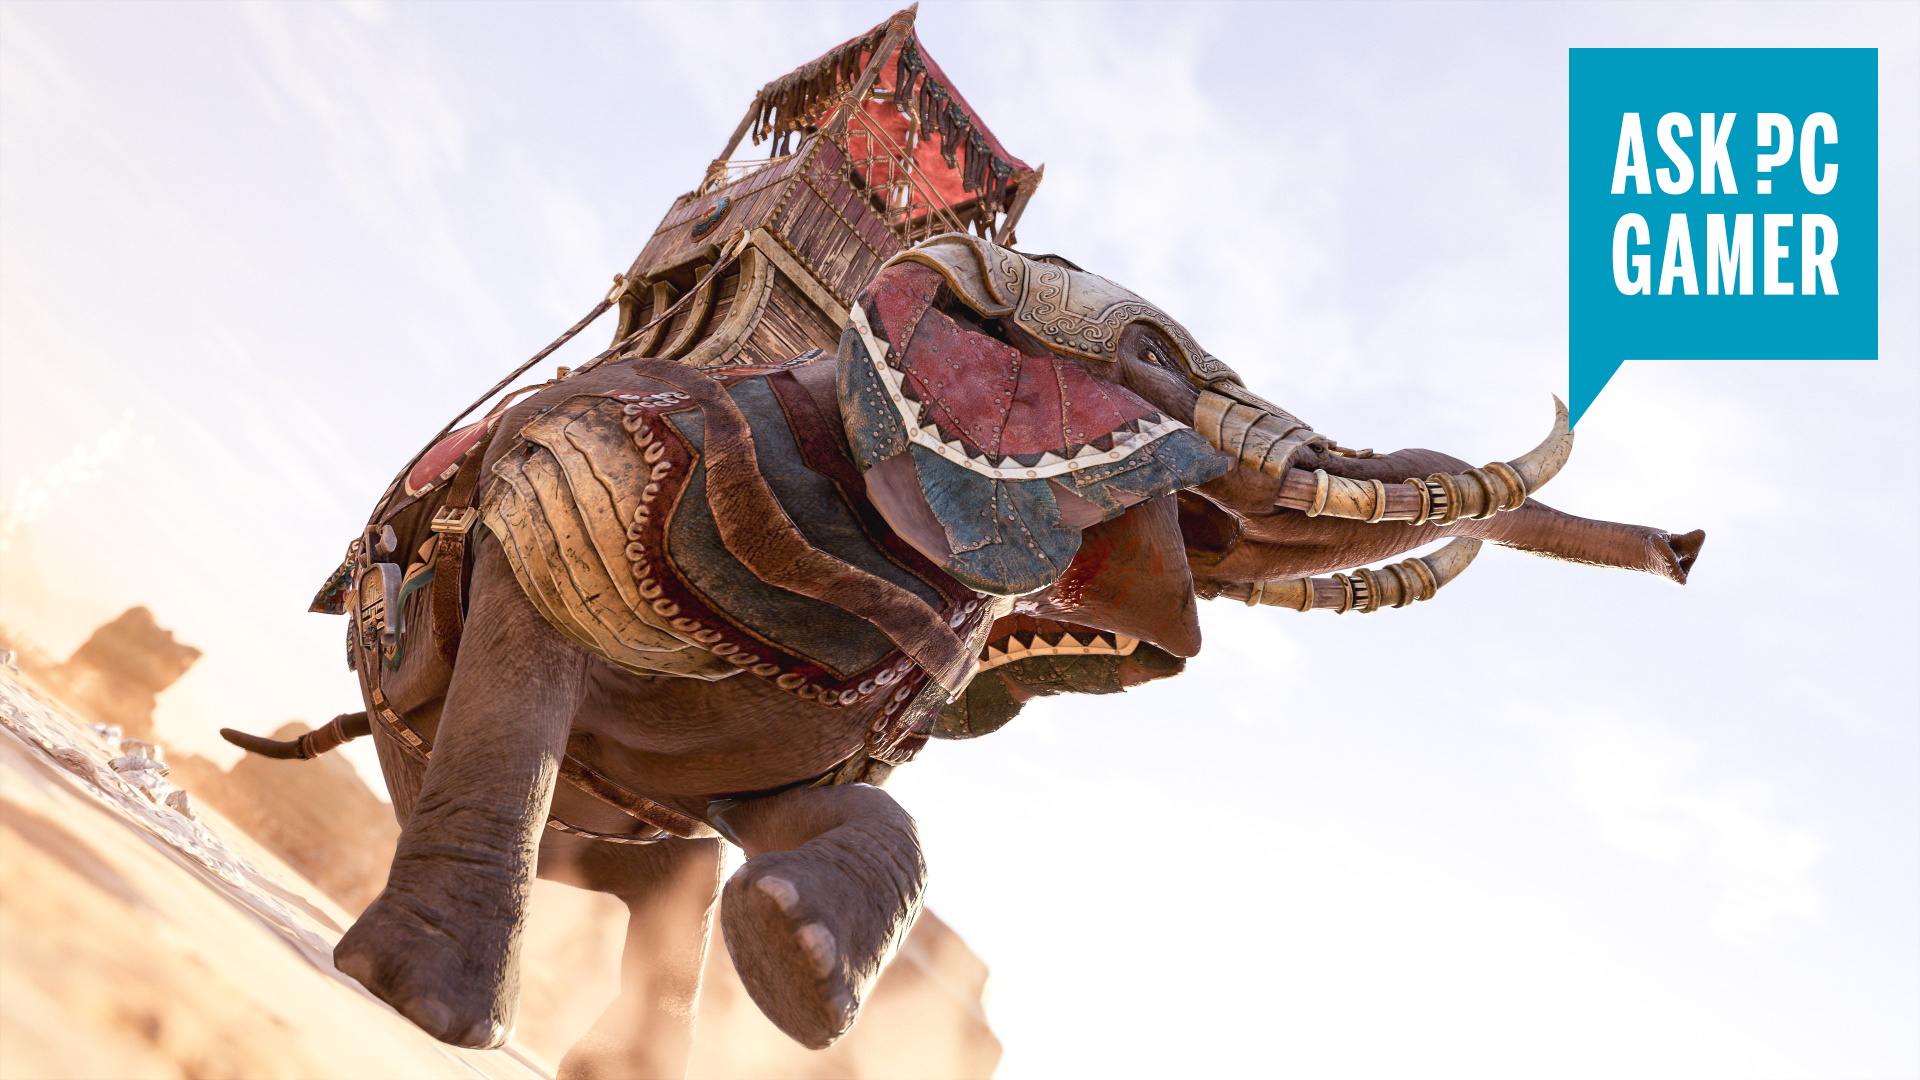 Stampeding Elephant from Assassin's Creed Odyssey